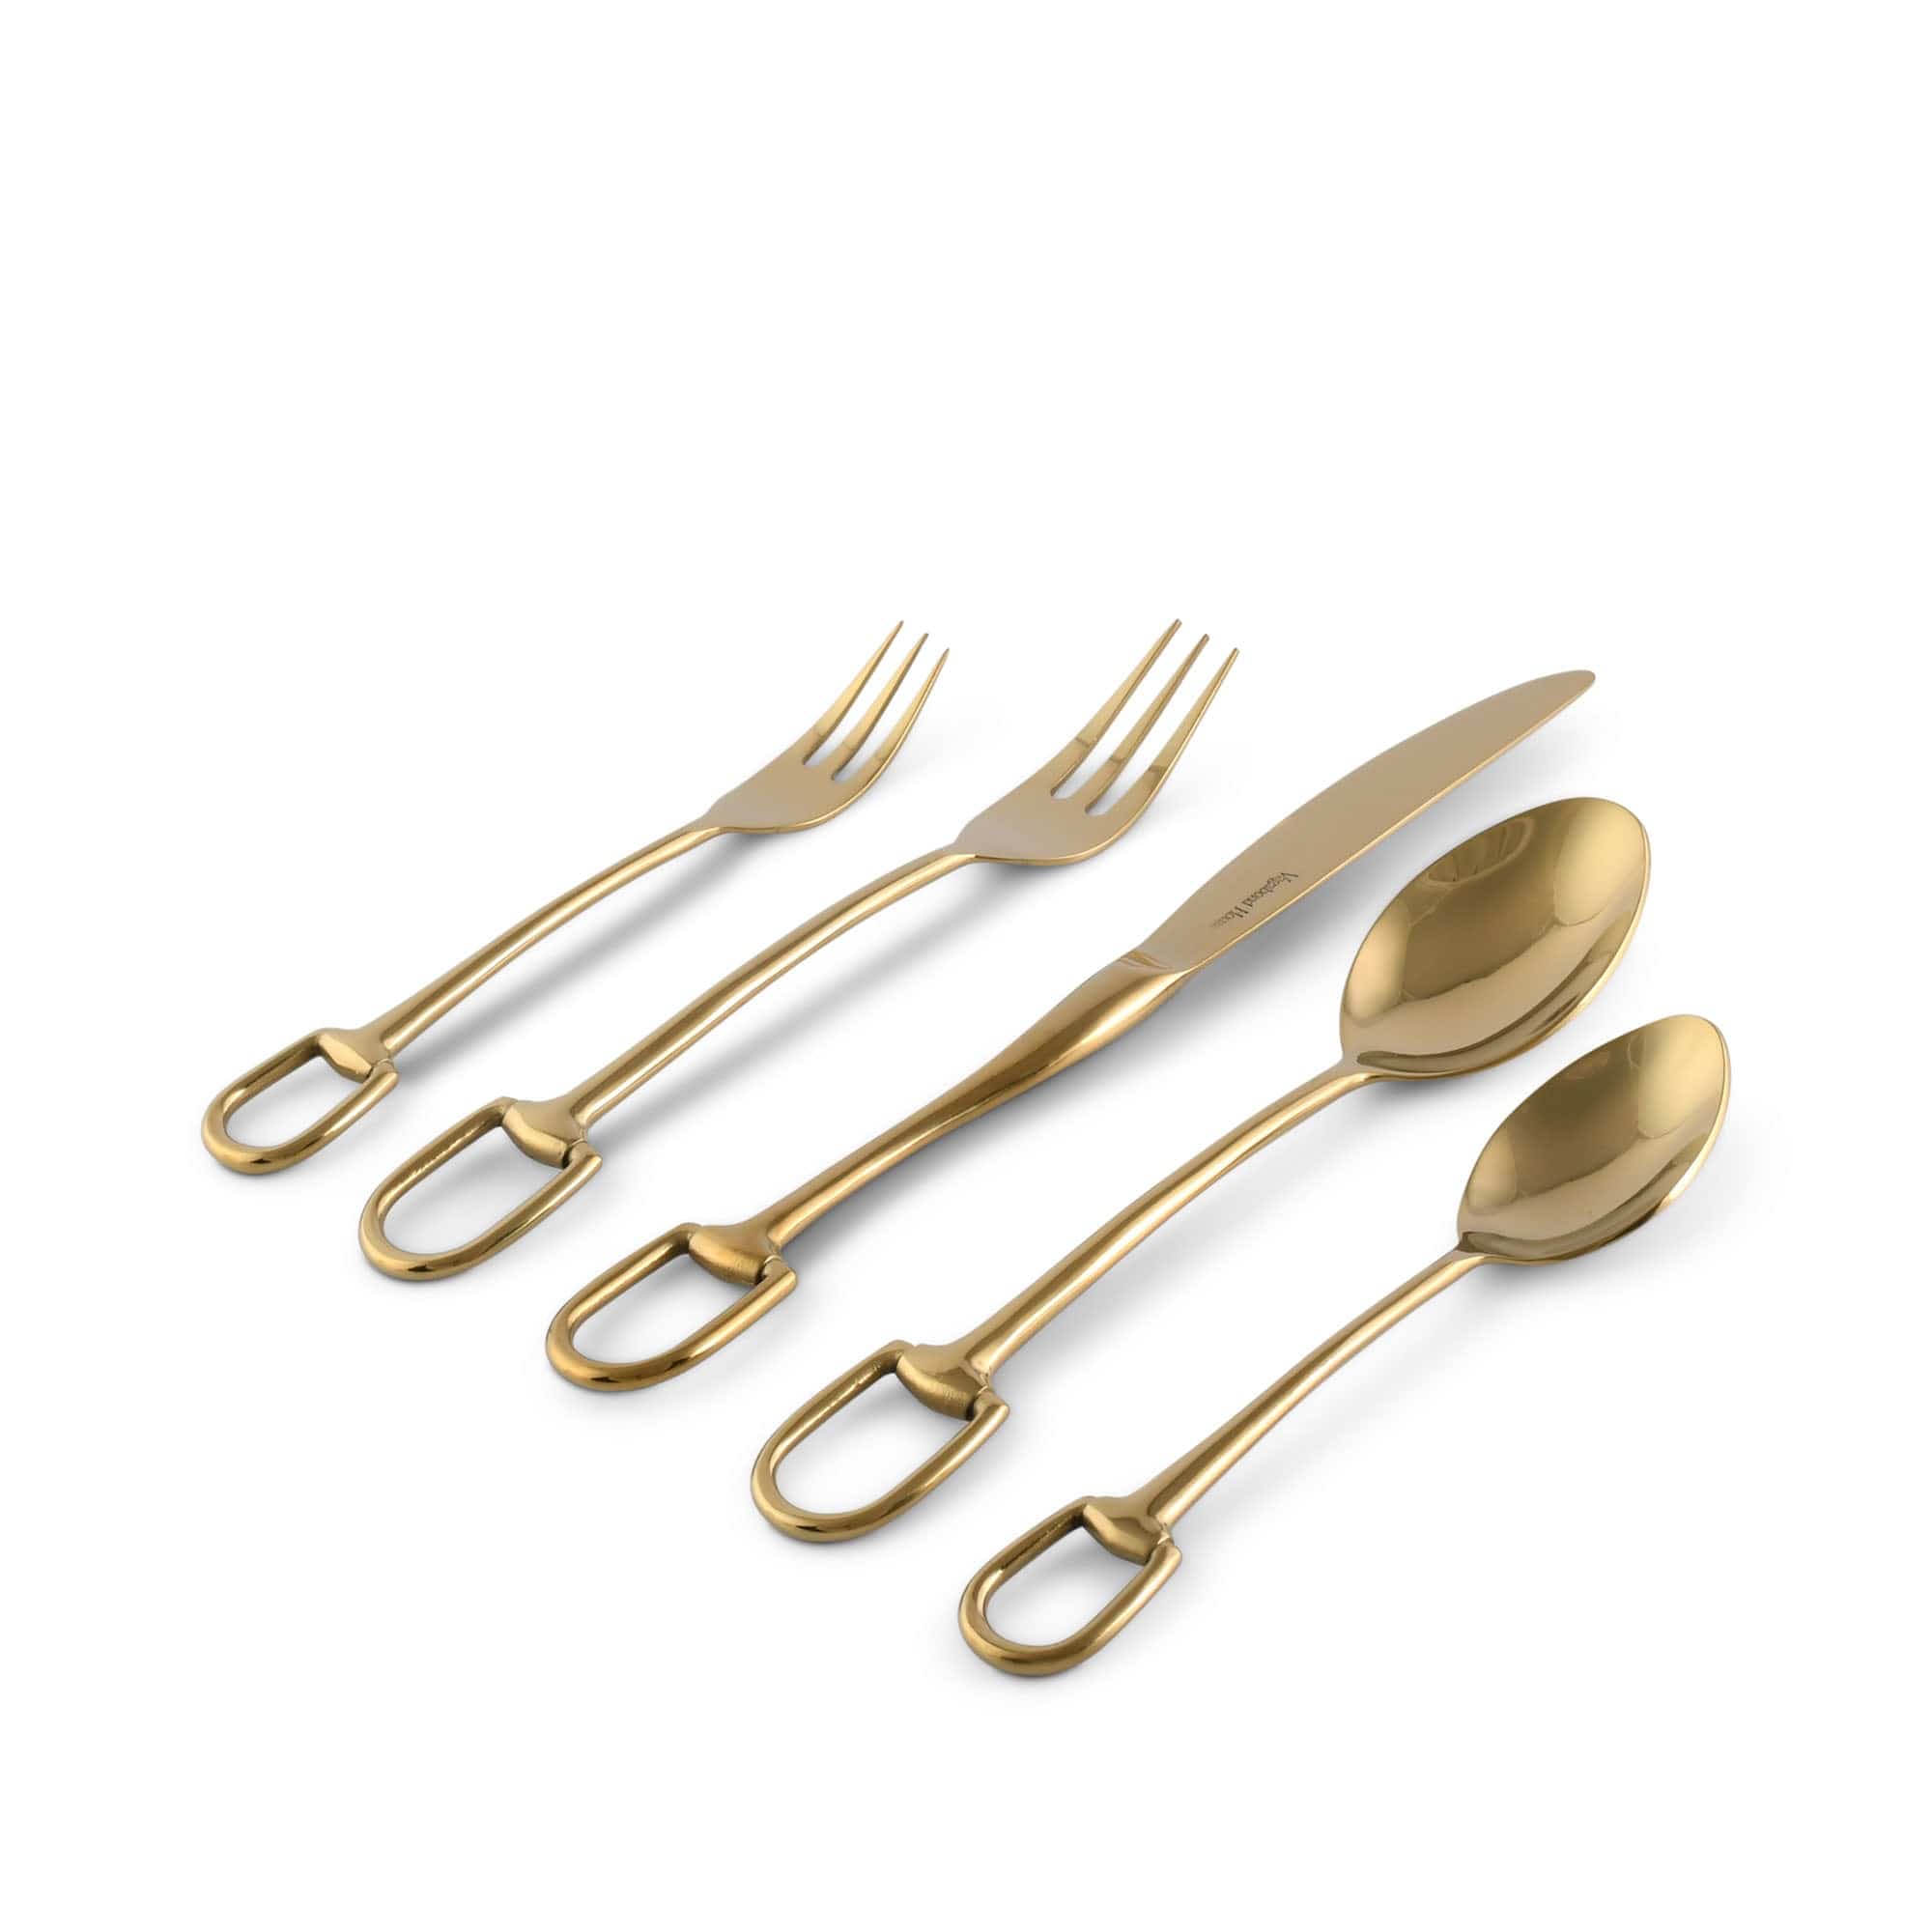 Cutlery and Flatware